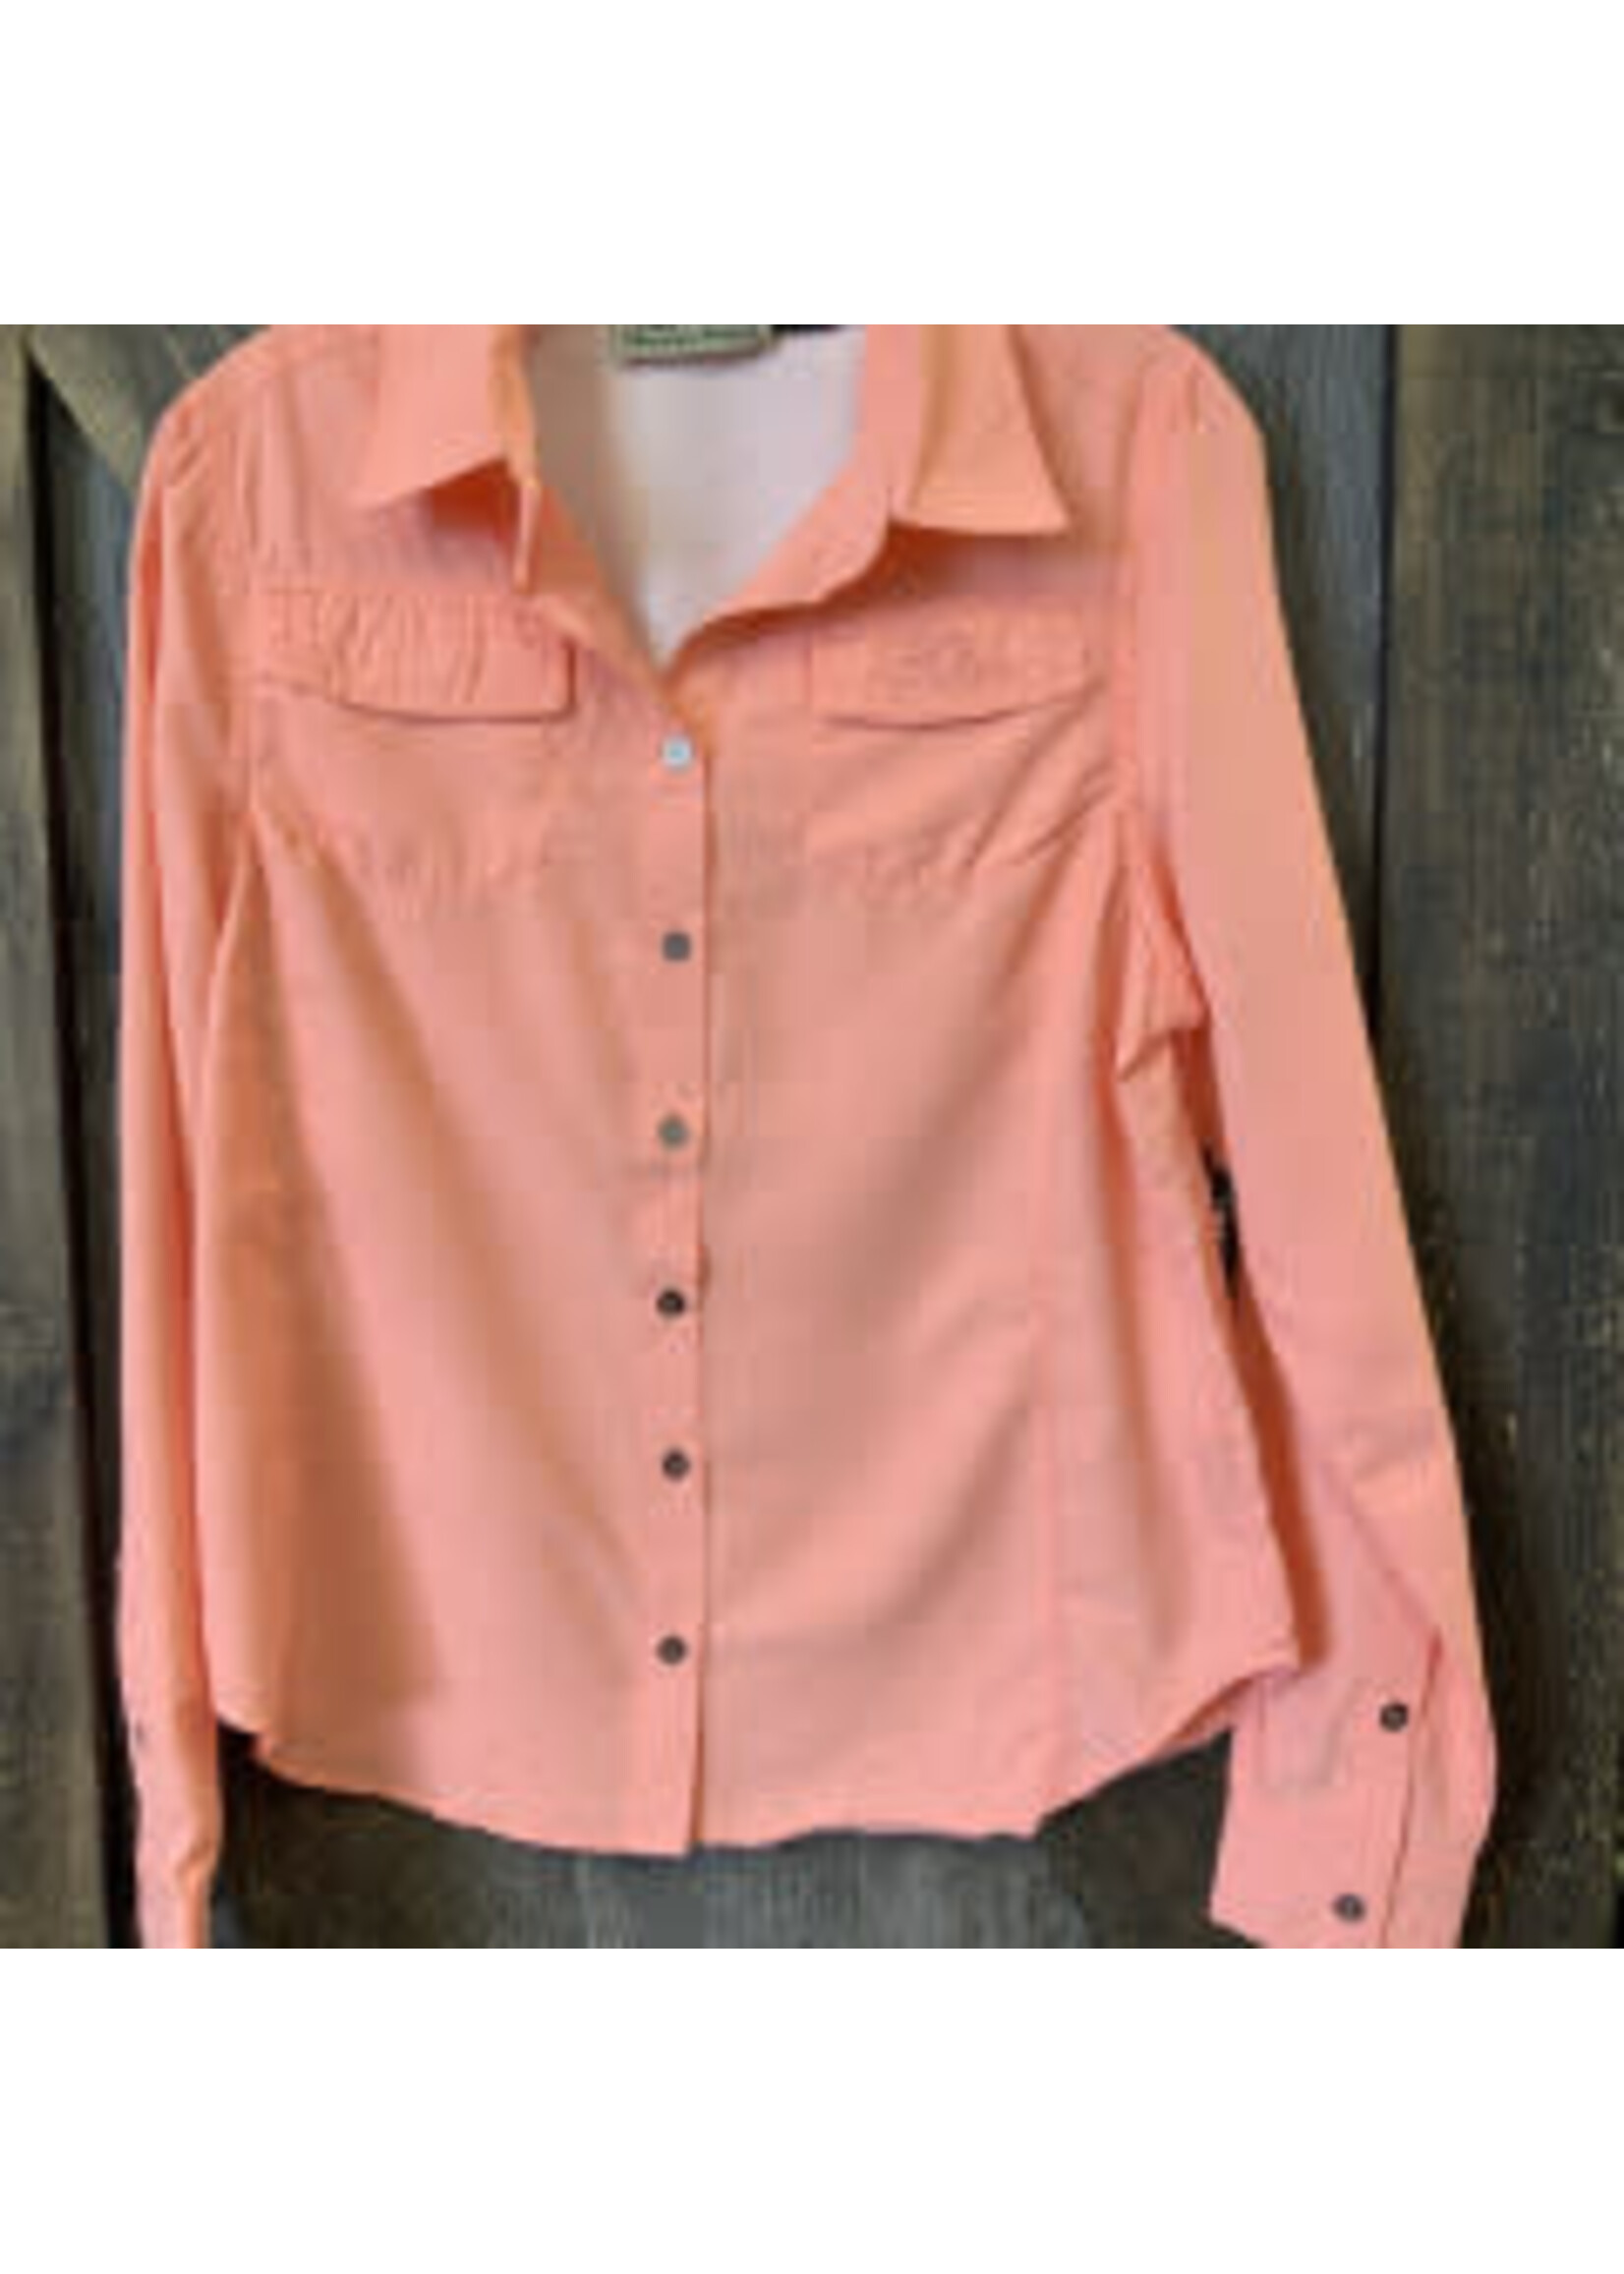 AMERICAN OUTBACK LADIES QUEST L/S SHIRT CORAL Sm